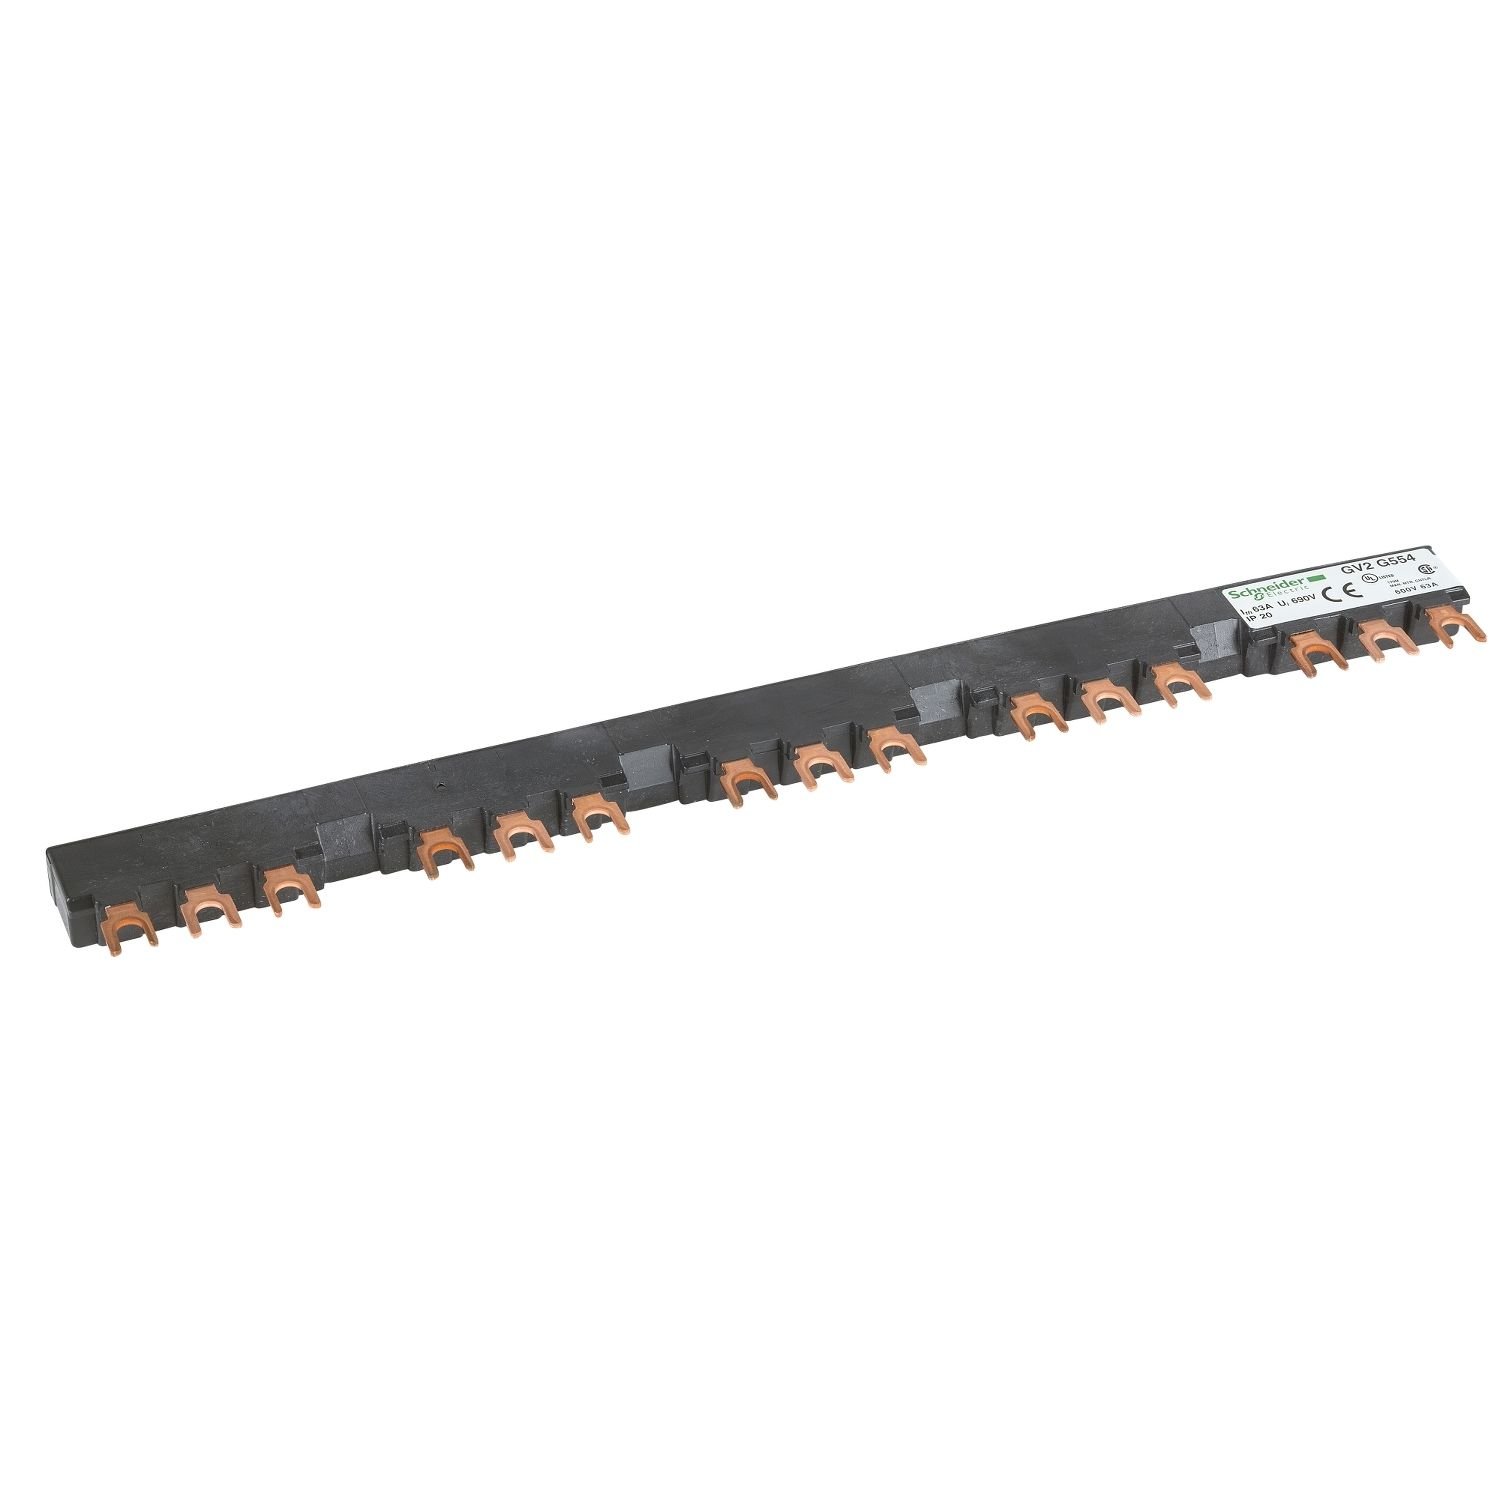 GV2G554 Linergy FT - Comb busbar - 63 A - 5 tap-offs - 54 mm pitch